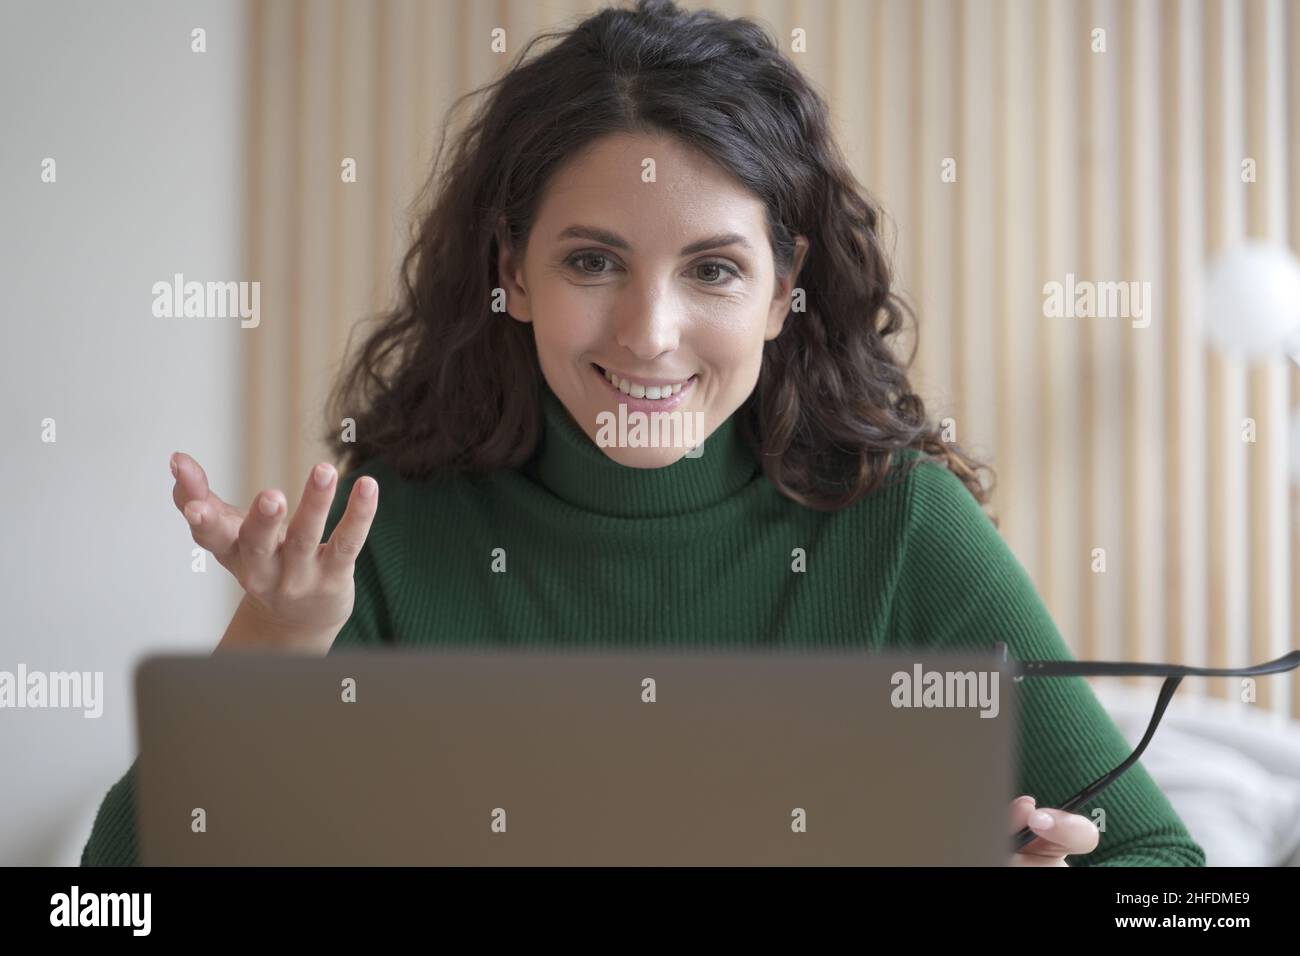 Smiling young Italian woman teacher tutor talks with students during online lesson on laptop Stock Photo